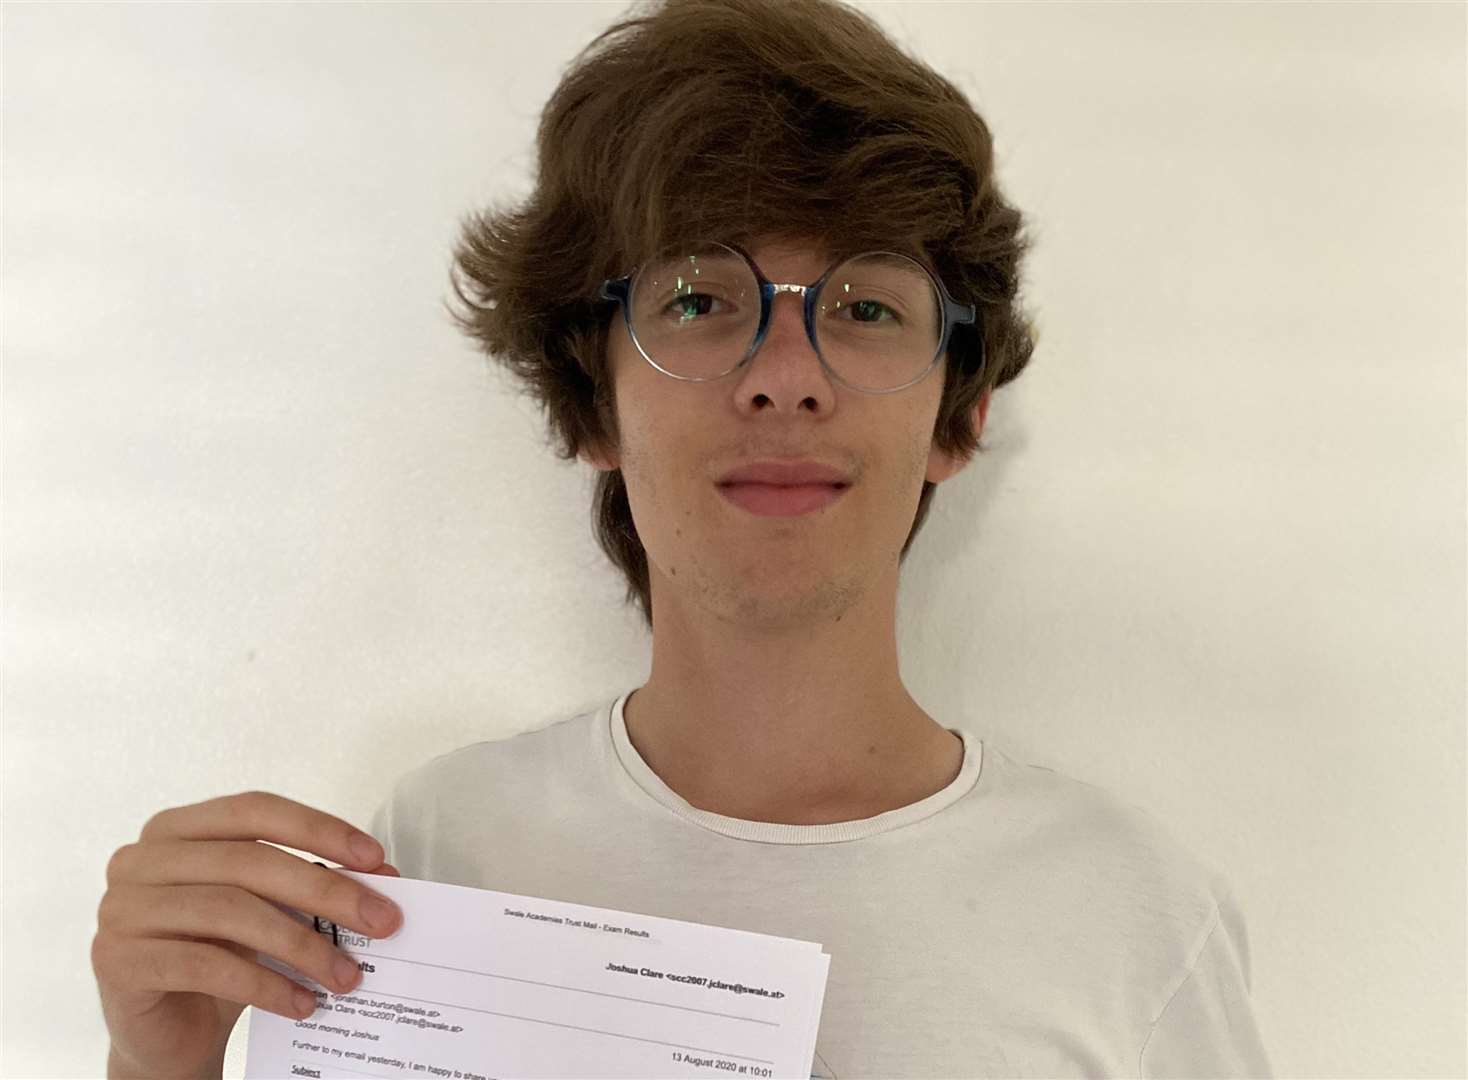 Josh Clare, from The Sittingbourne School, with his results - he'll now head to Oxford University